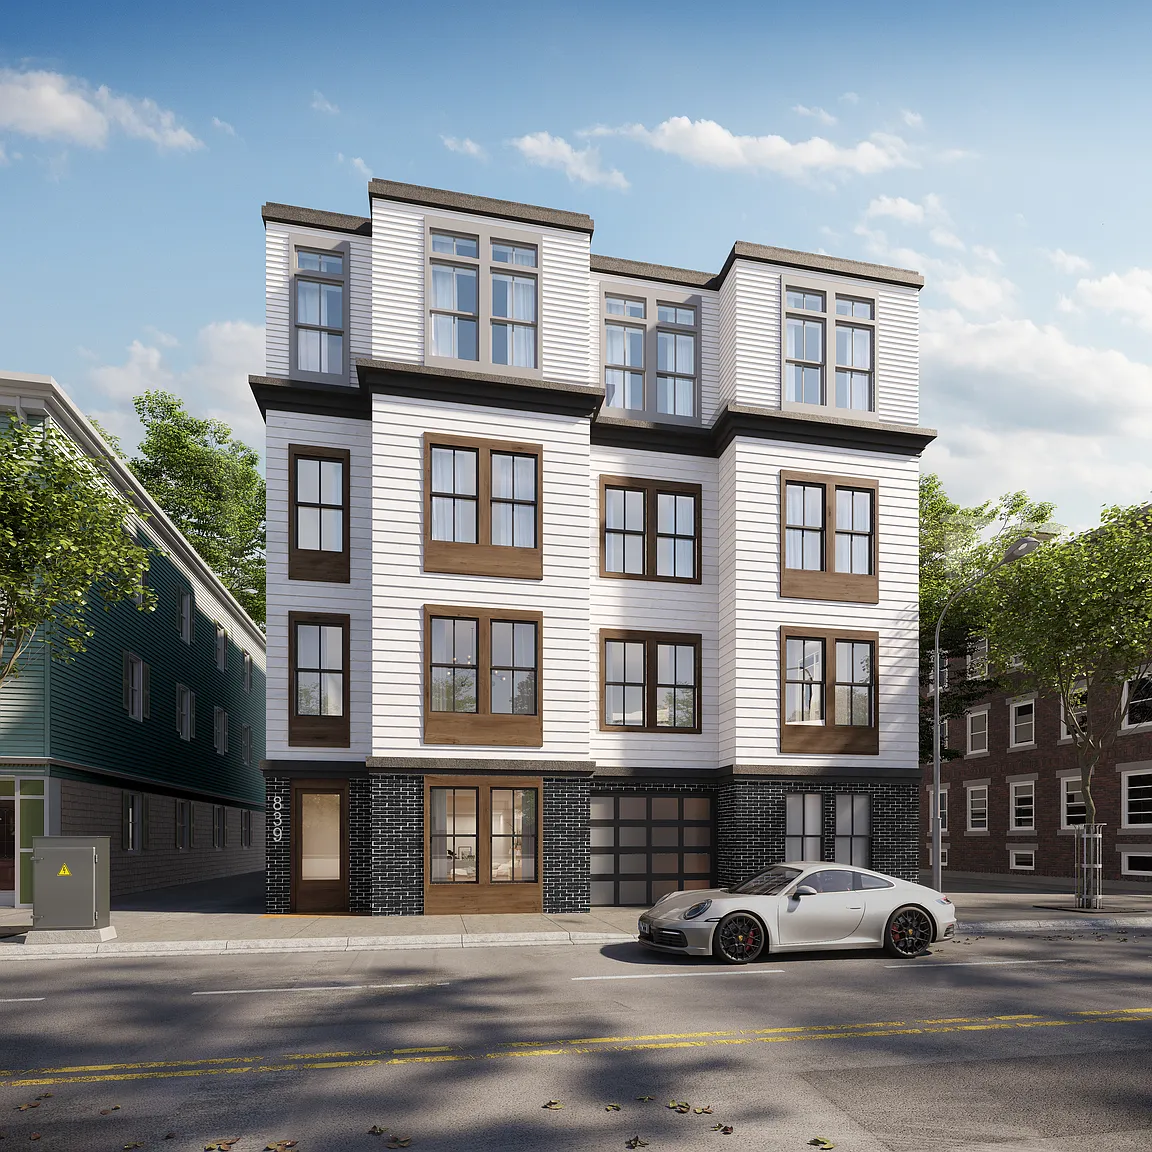 839 Saratoga St Unit 1 and other remaining spaces, from the outside. Tall modern building with car in front. This is a rendering.